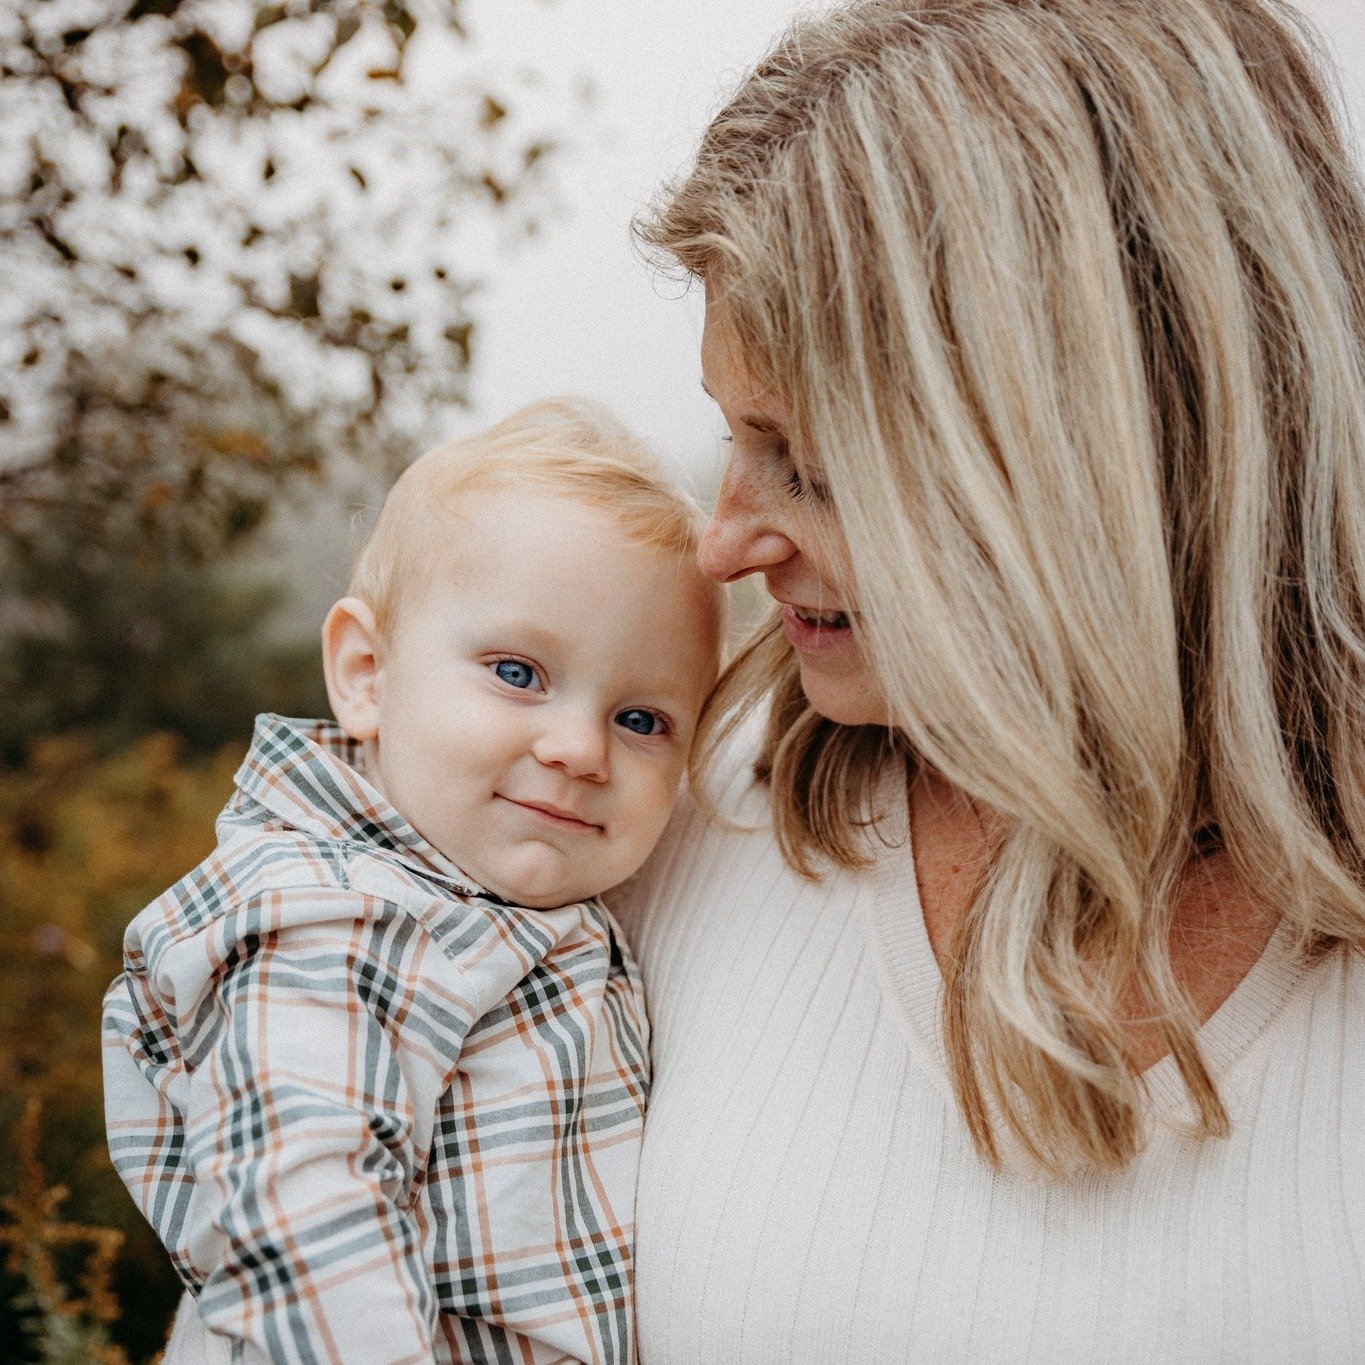 👋 Dr. Nikki here to share something that has been on my mind lately&hellip;

As I navigate early motherhood, I have been working hard at trusting that I know what is best for my baby.  Trusting that what is happening is normal and natural and quieti